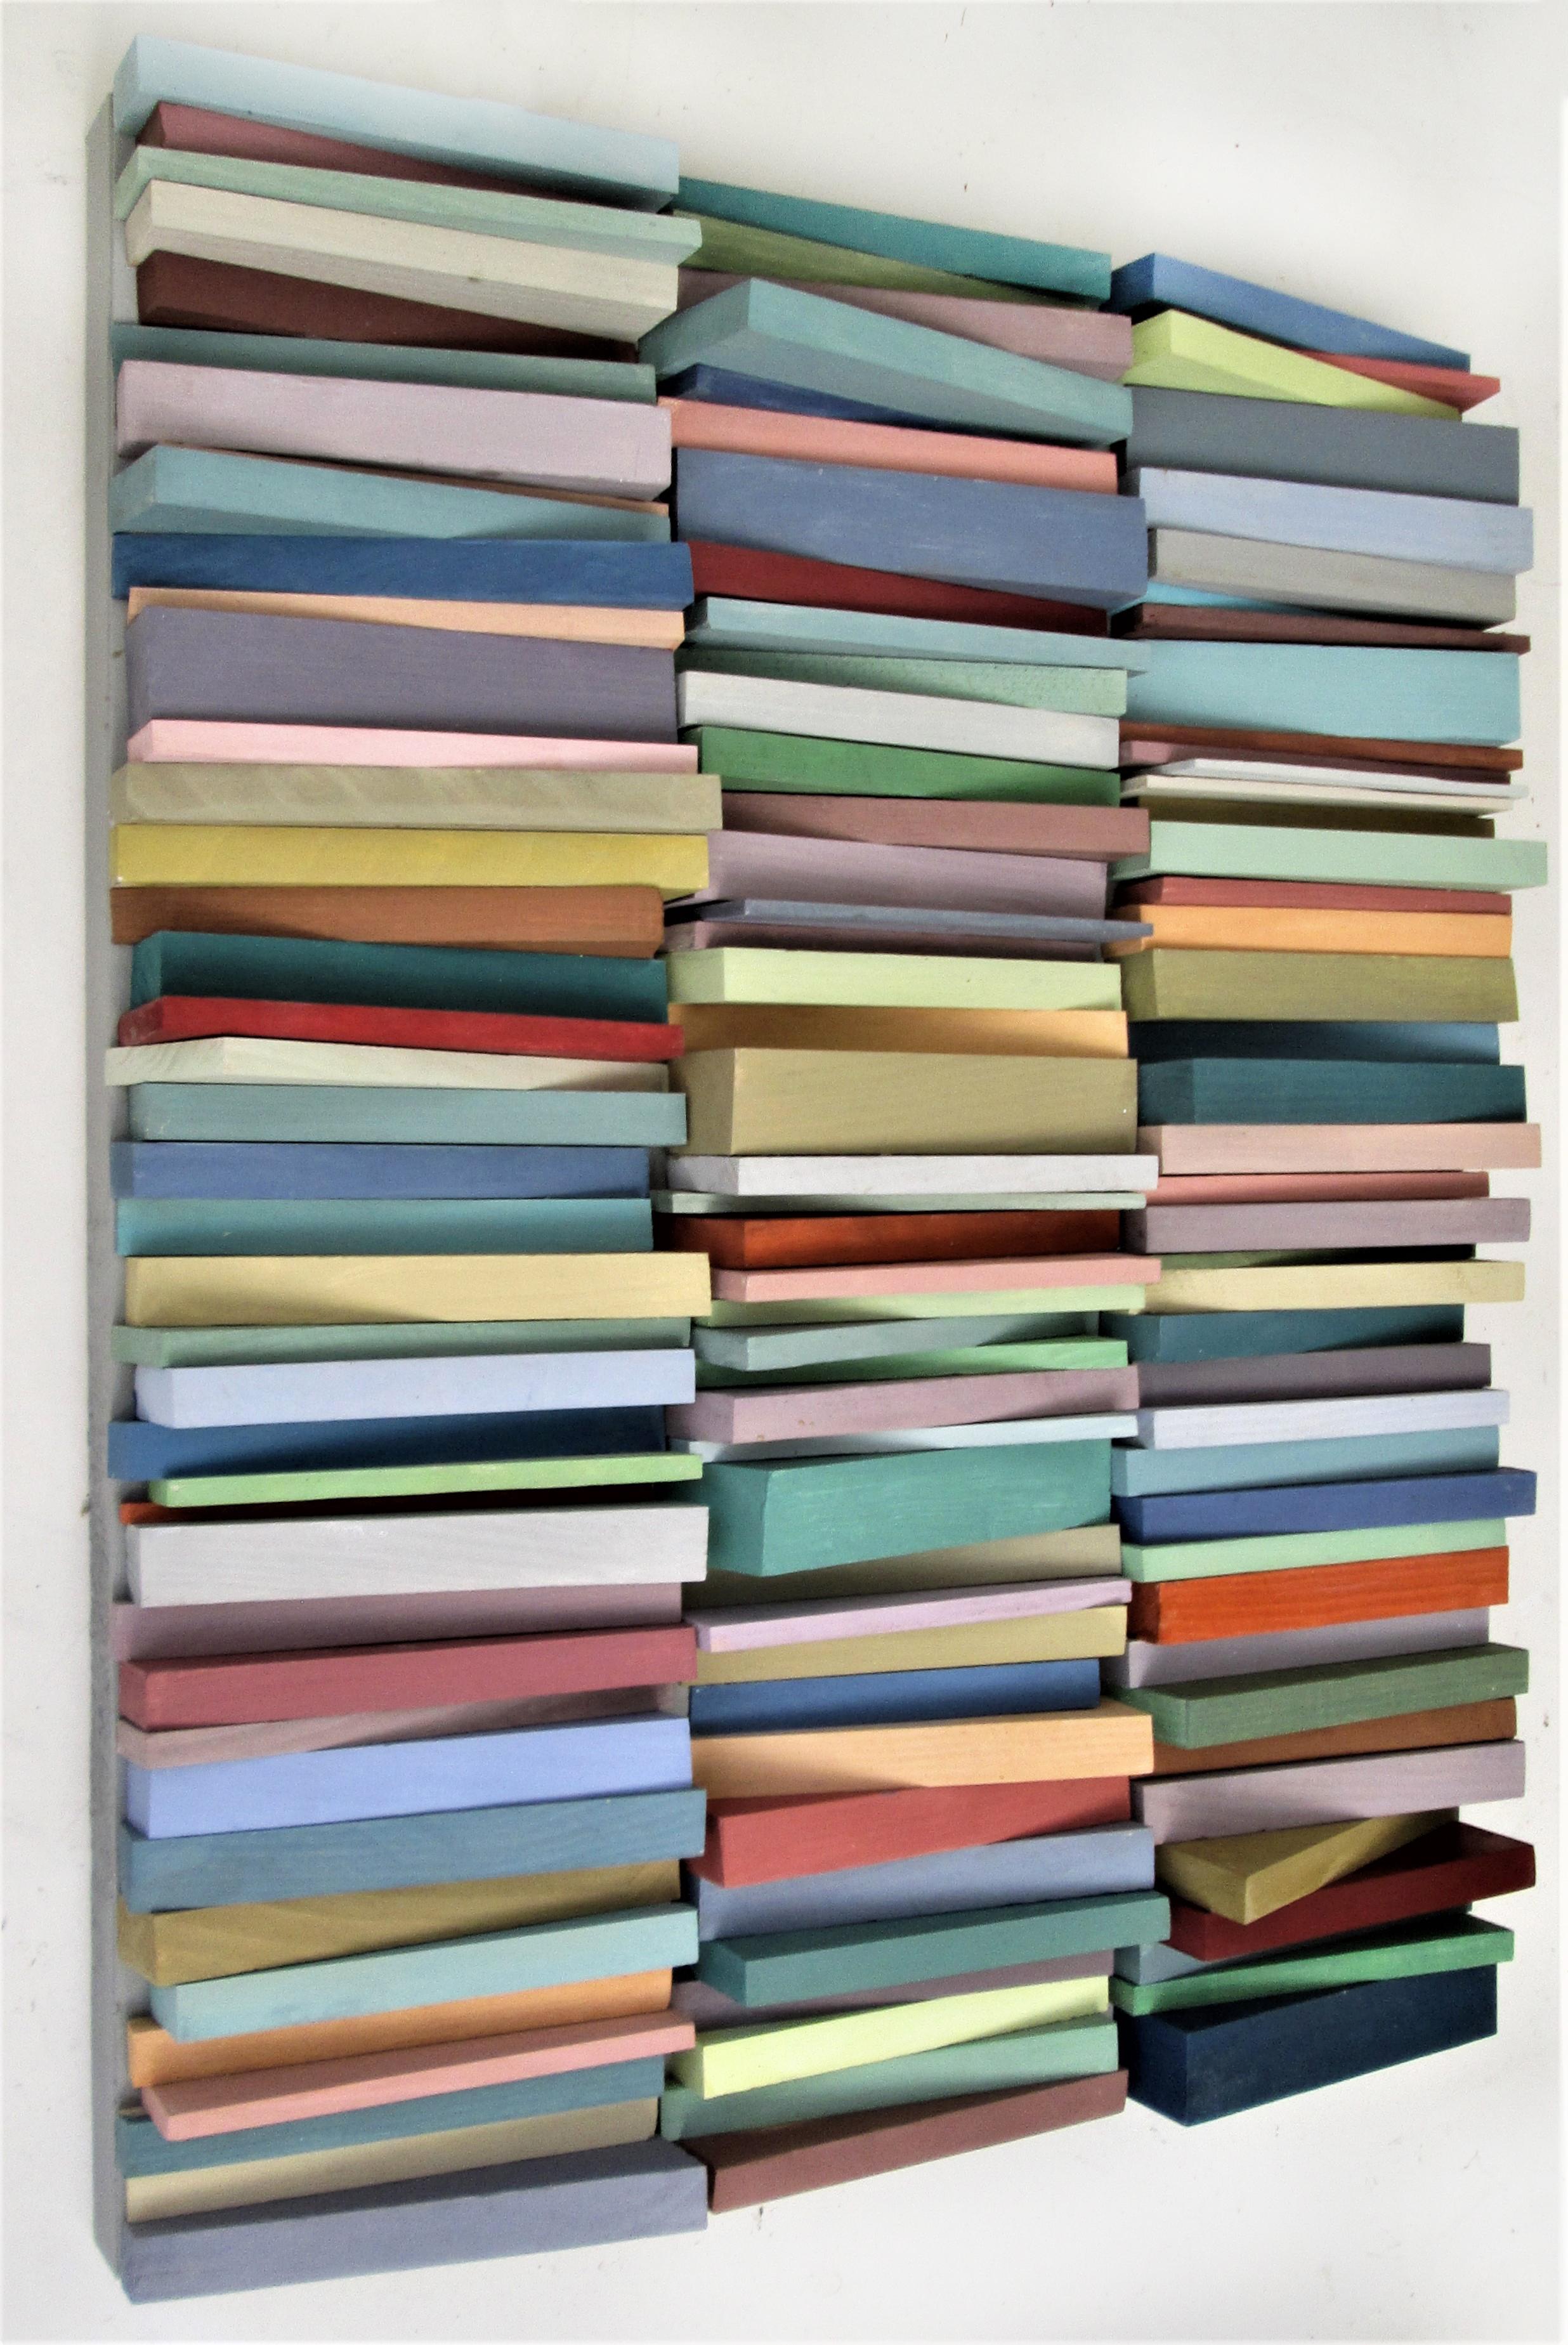 Stacked (Vertical Multi Colored Three Dimensional Wood Wall Sculpture) by Stephen Walling
Acrylic, wood, wood panel
30 x 24 x 2.5 inches
Wall sculpture is vertical orientation, wired with wire and D-rings on reverse

This abstract, modern